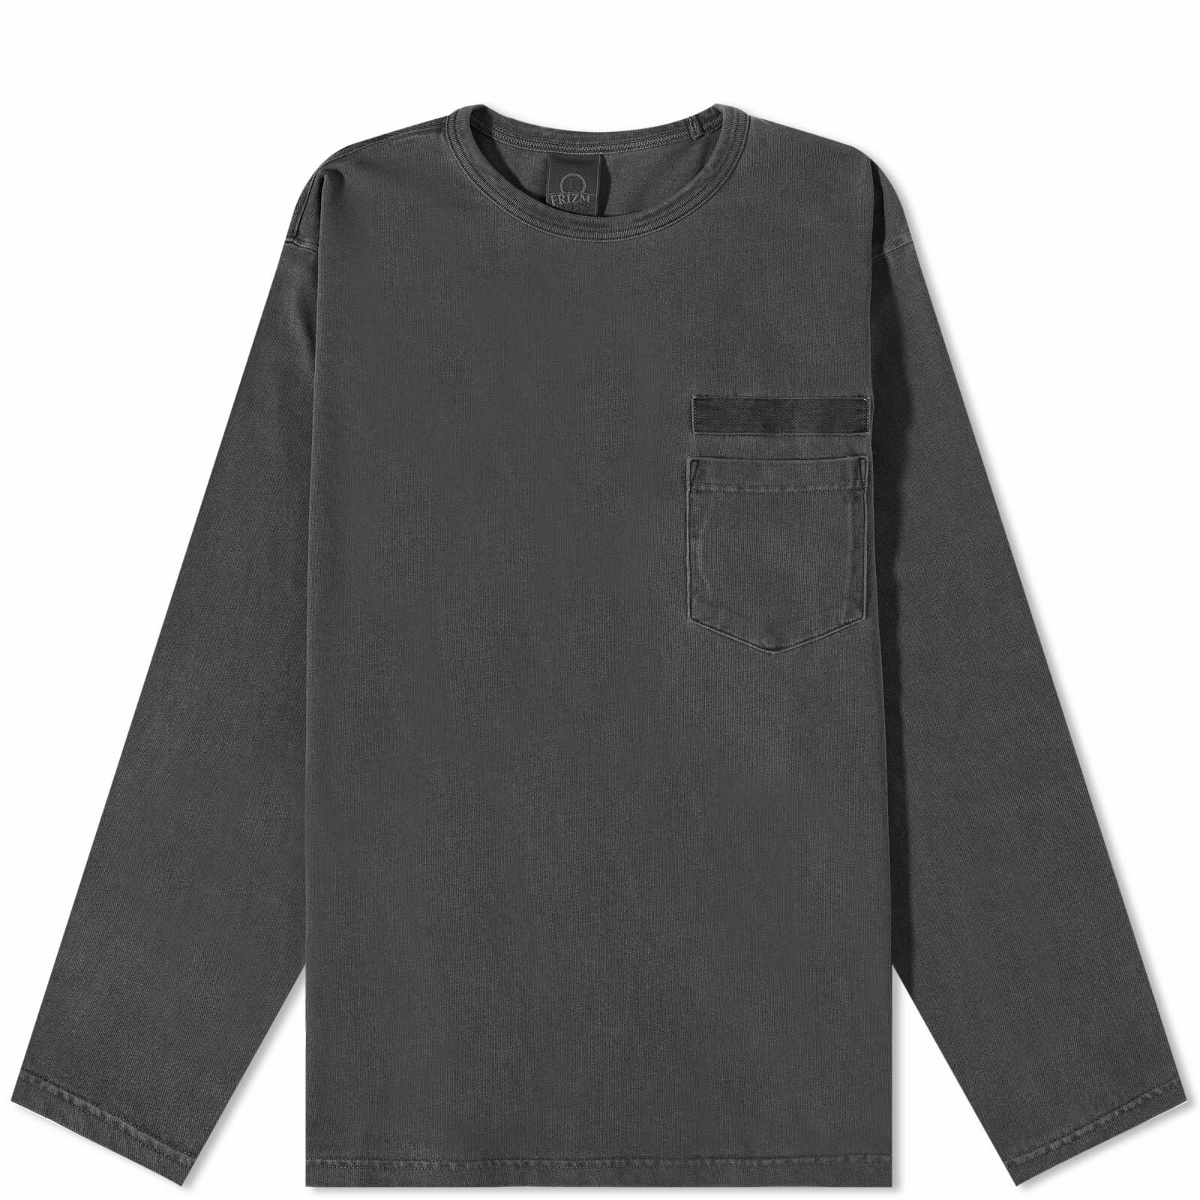 FrizmWORKS Men's Long Sleeve Pigment Dyed Mil T-Shirt in Charcoal ...